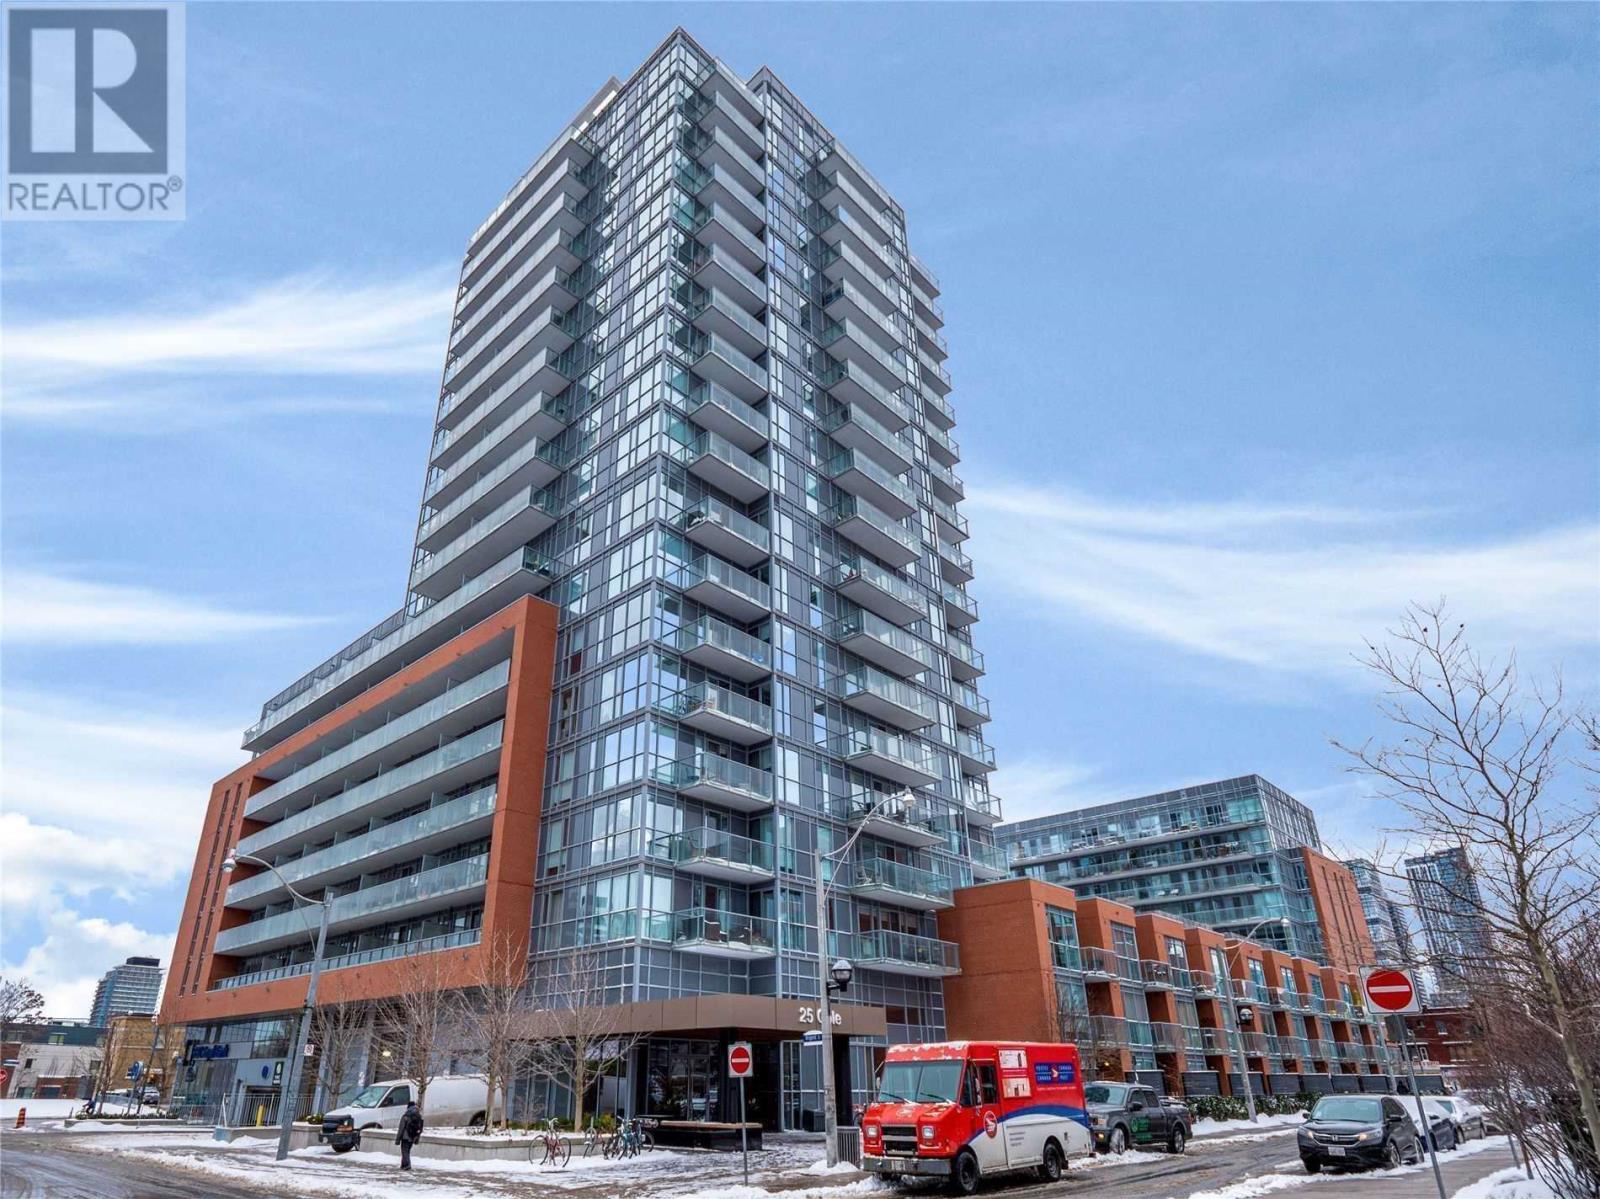 For Sale: #326 -25 COLE ST, Toronto, ON